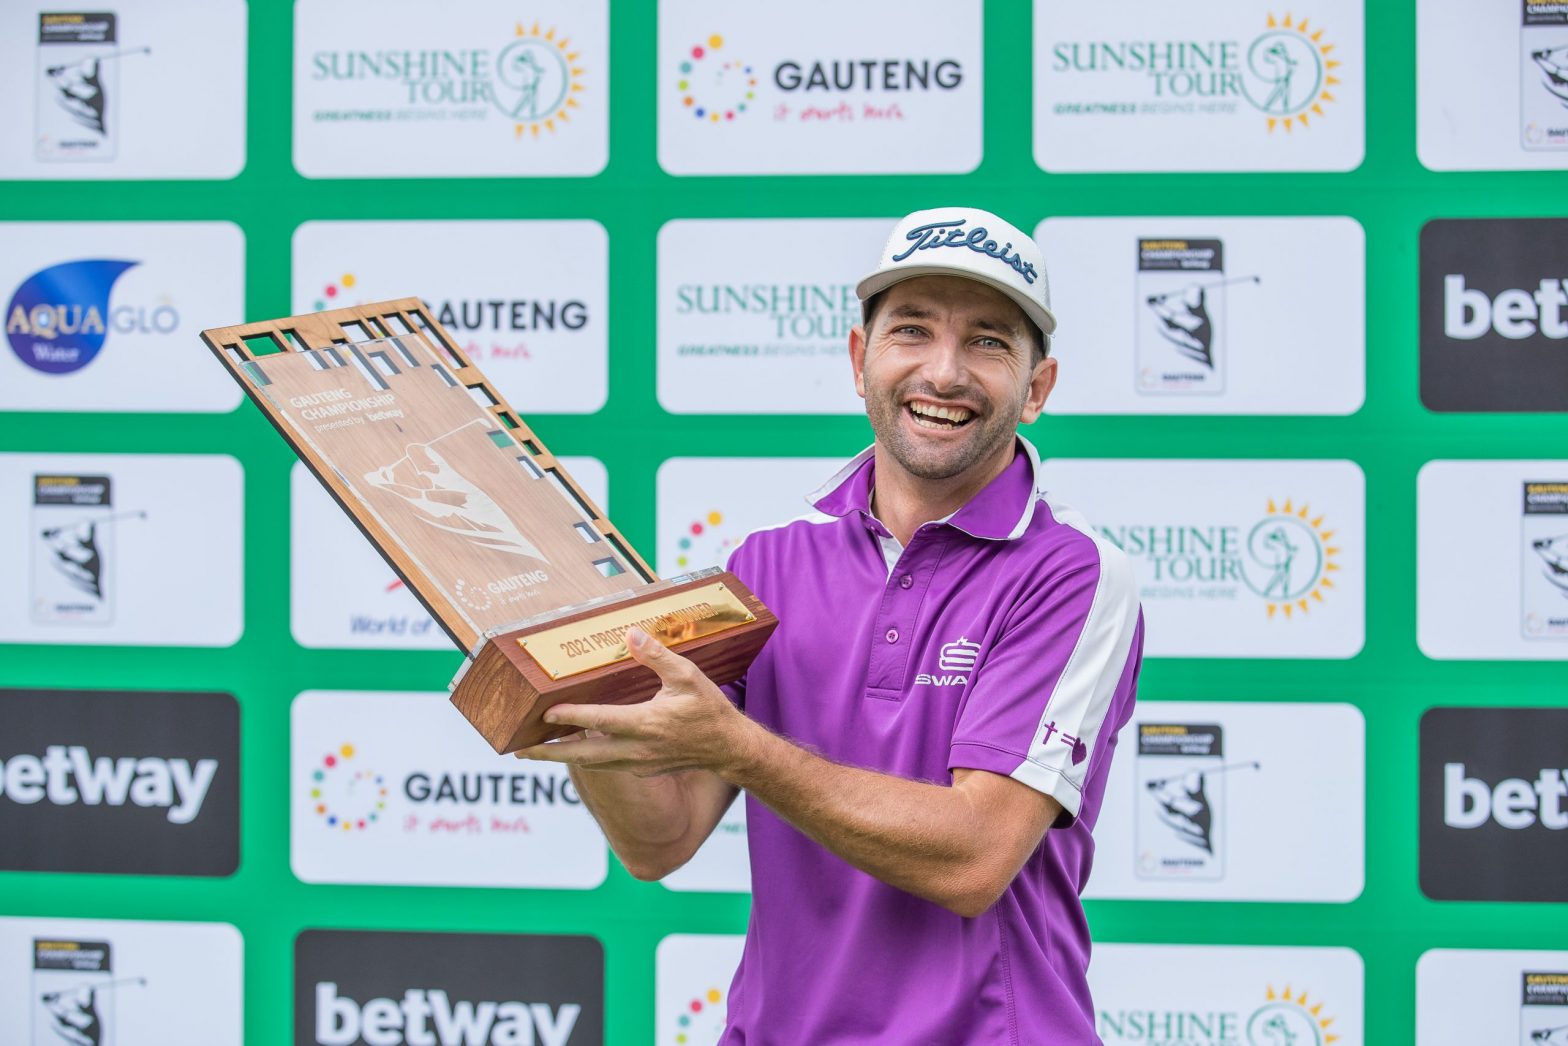 Kruger strikes gold in Gauteng Championship presented by Betway